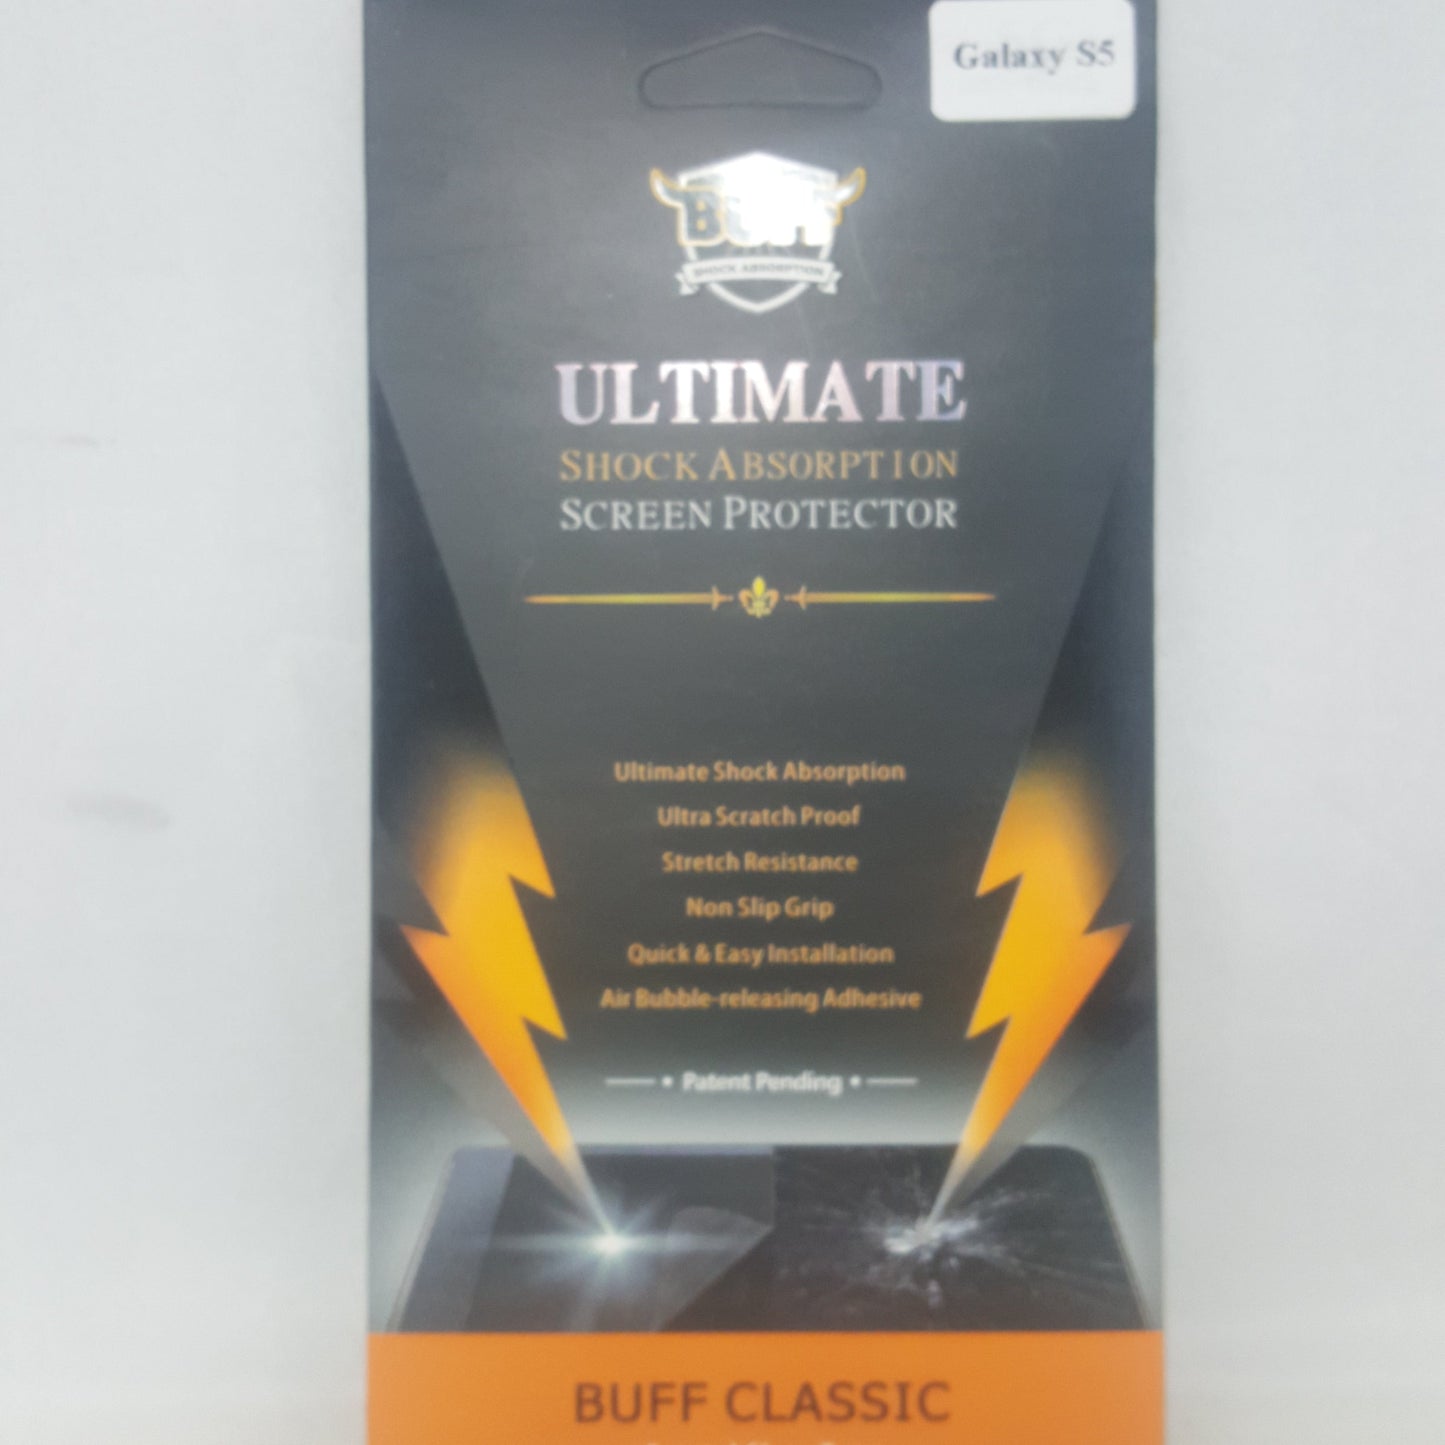 Screen Protectors - Ultimate Shock Absorption Screen Protector For Galaxy S5